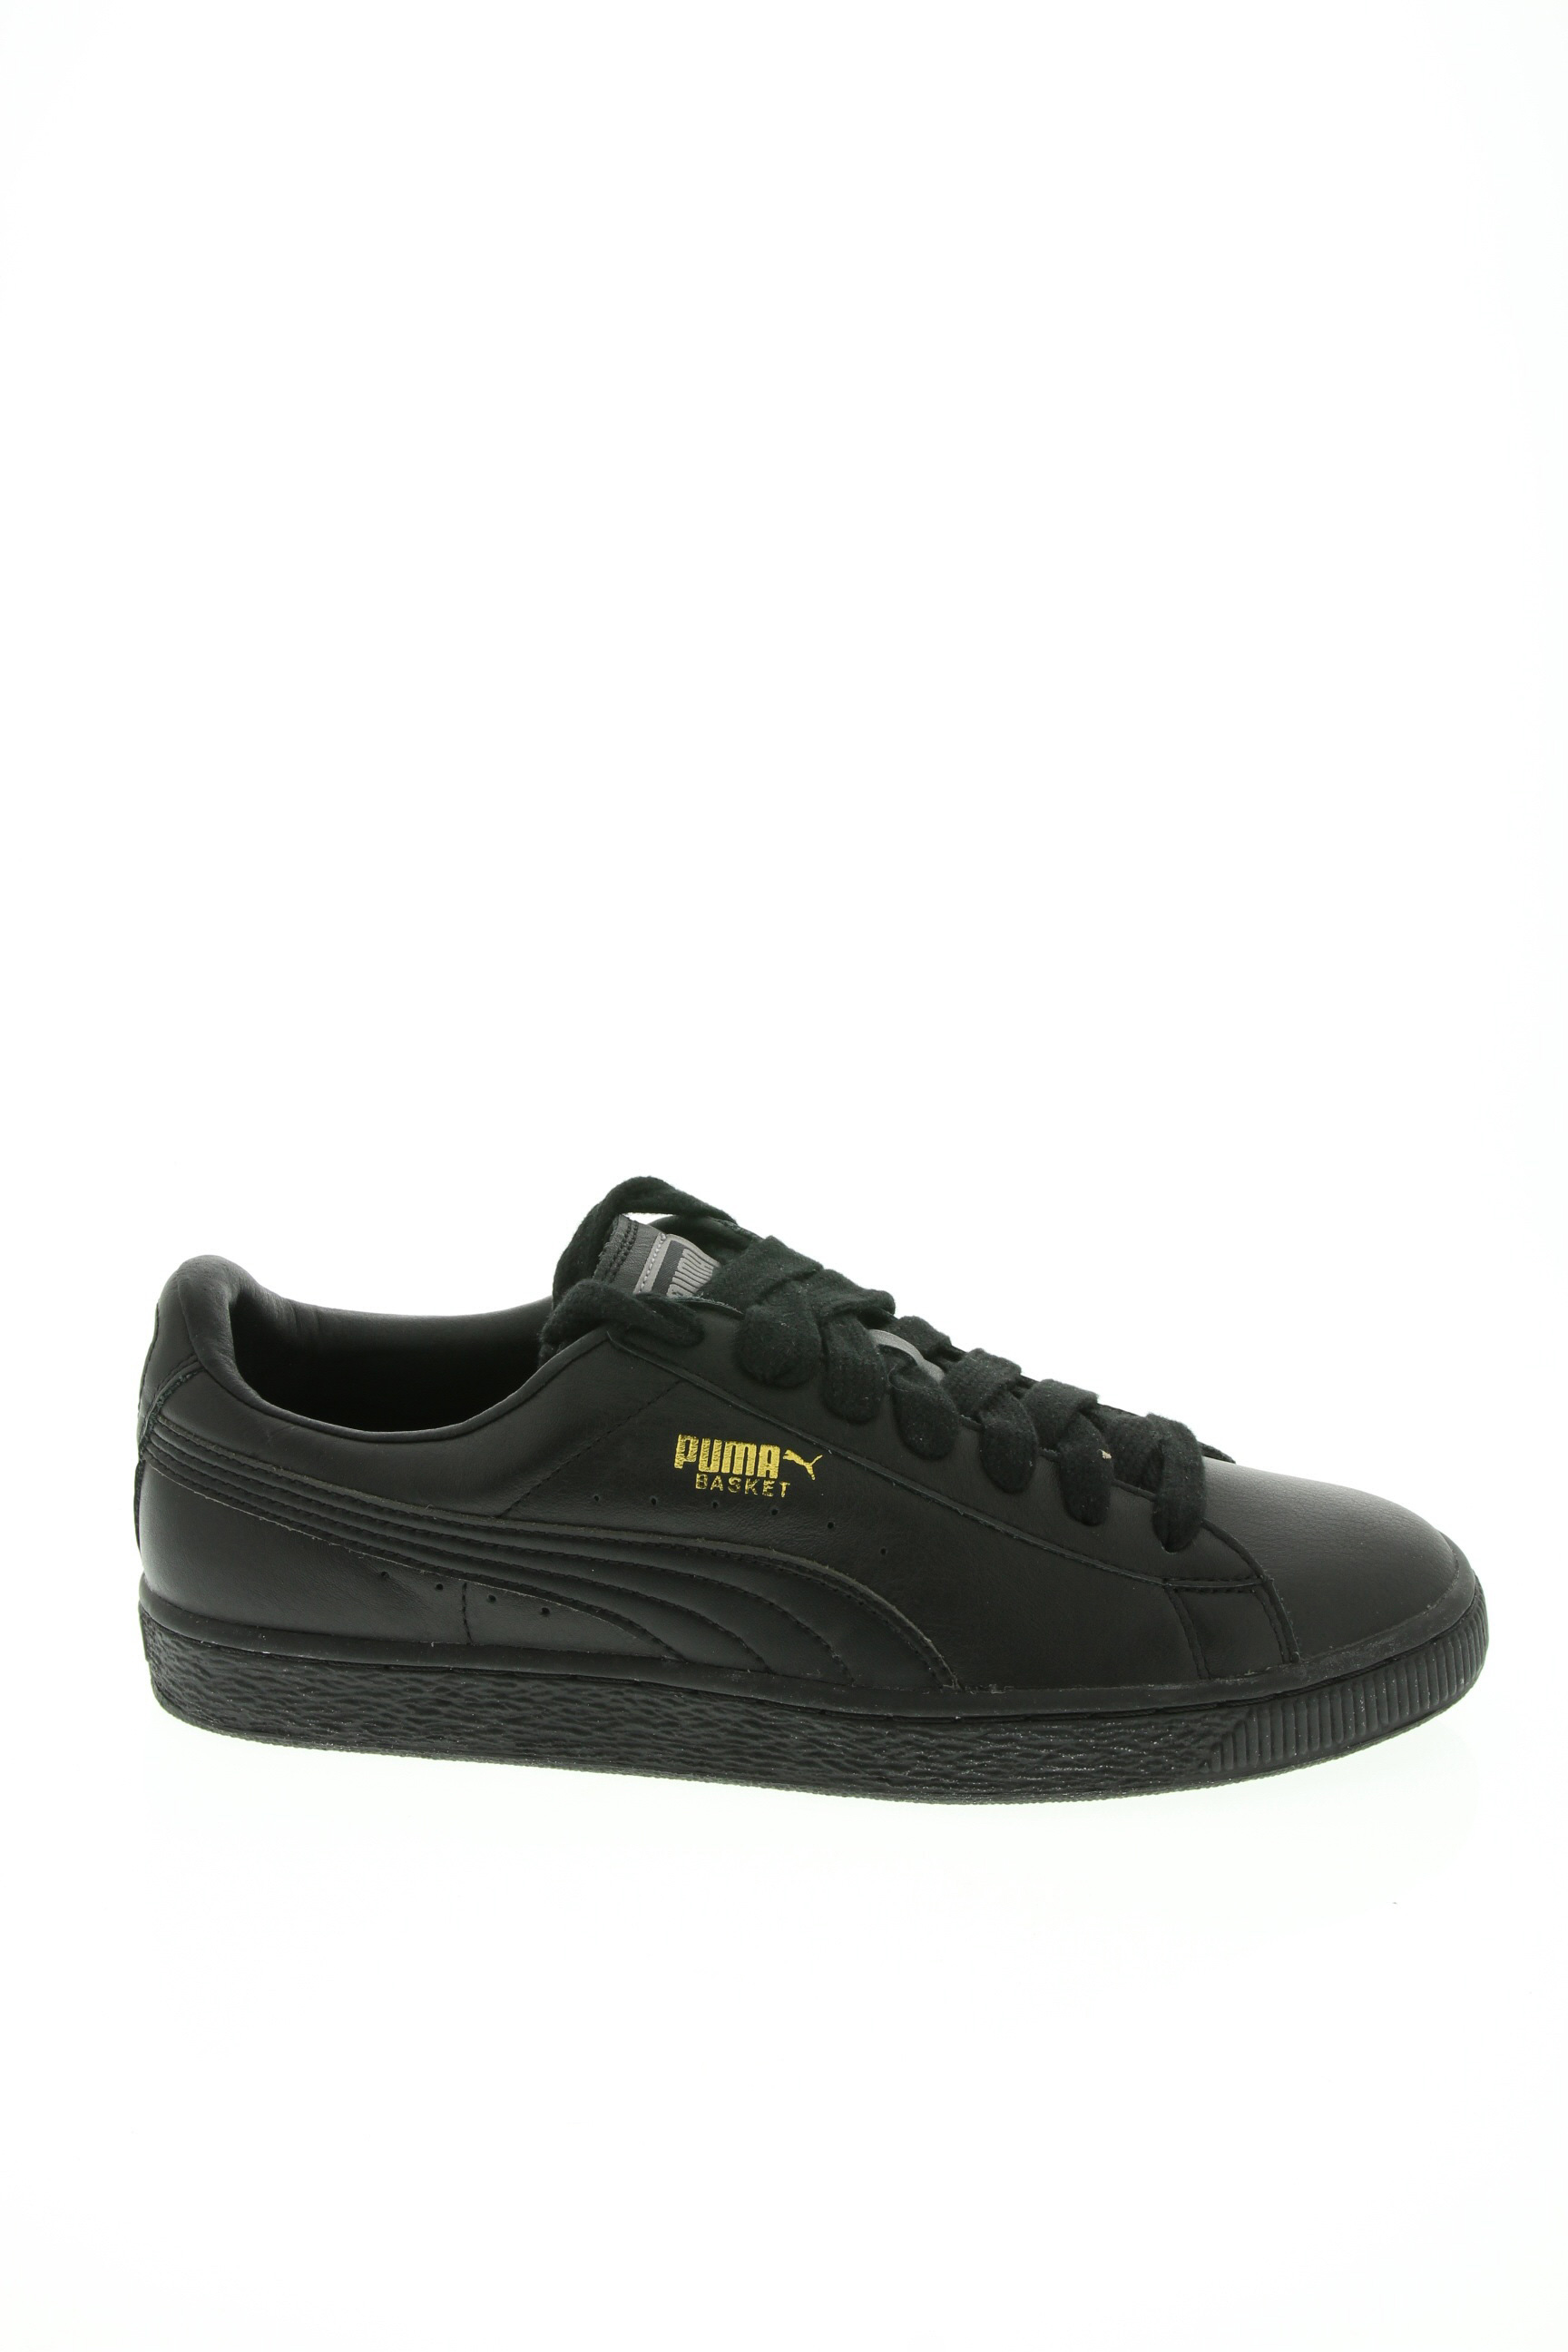 puma homme taille 43